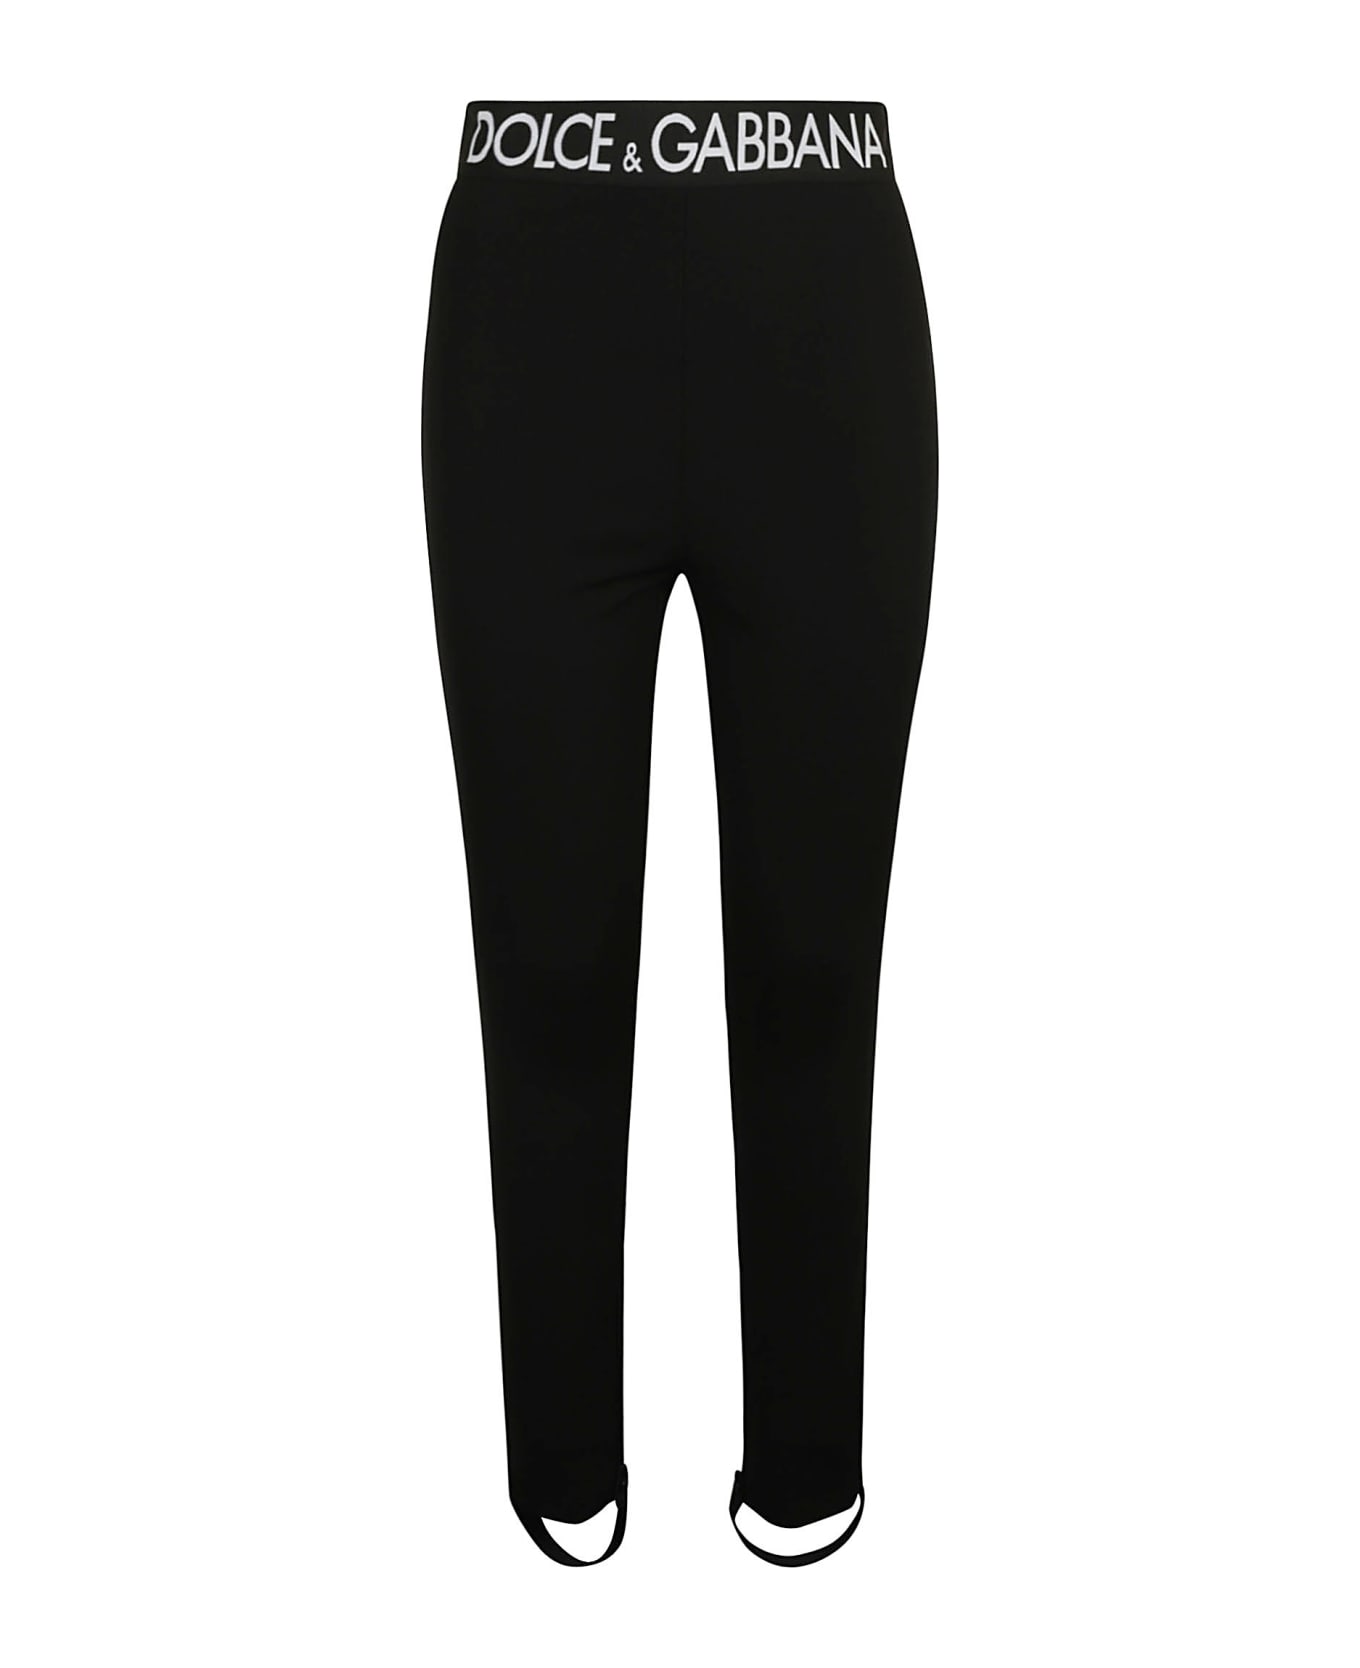 Dolce & Gabbana Fitted Waist Trousers